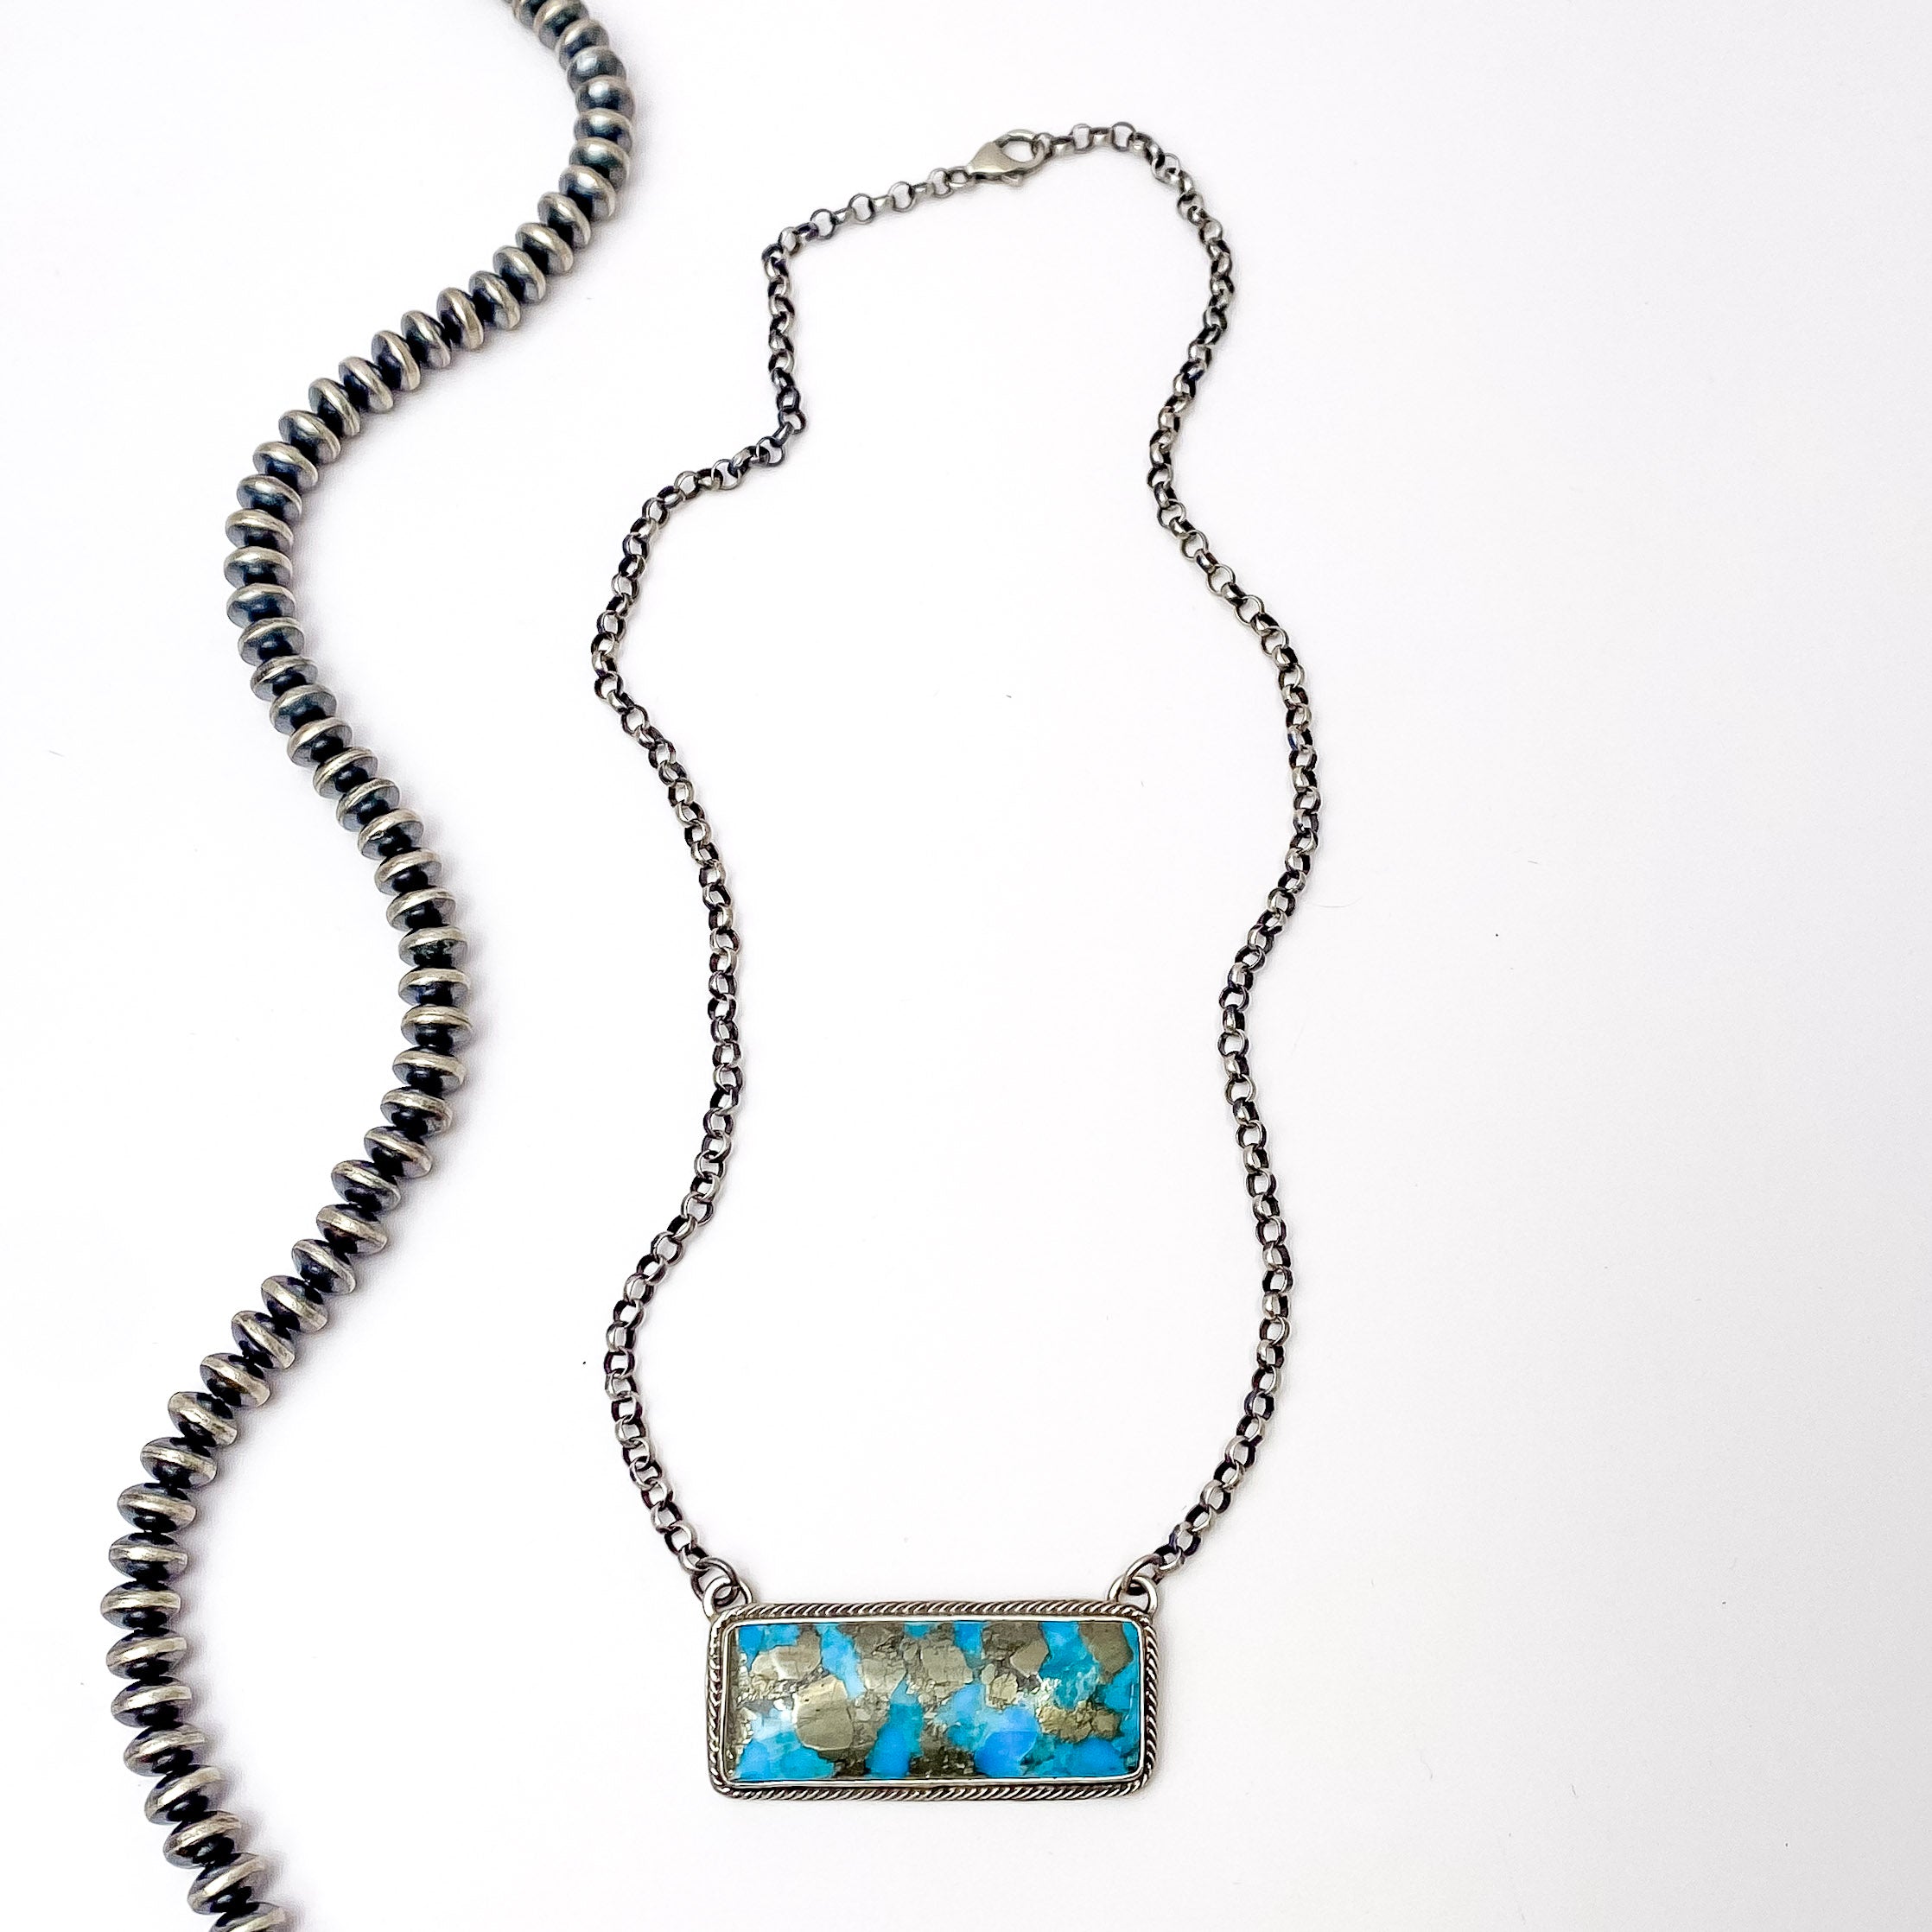 Centered in the picture is a kingman turquoise bar necklace on a white background. 